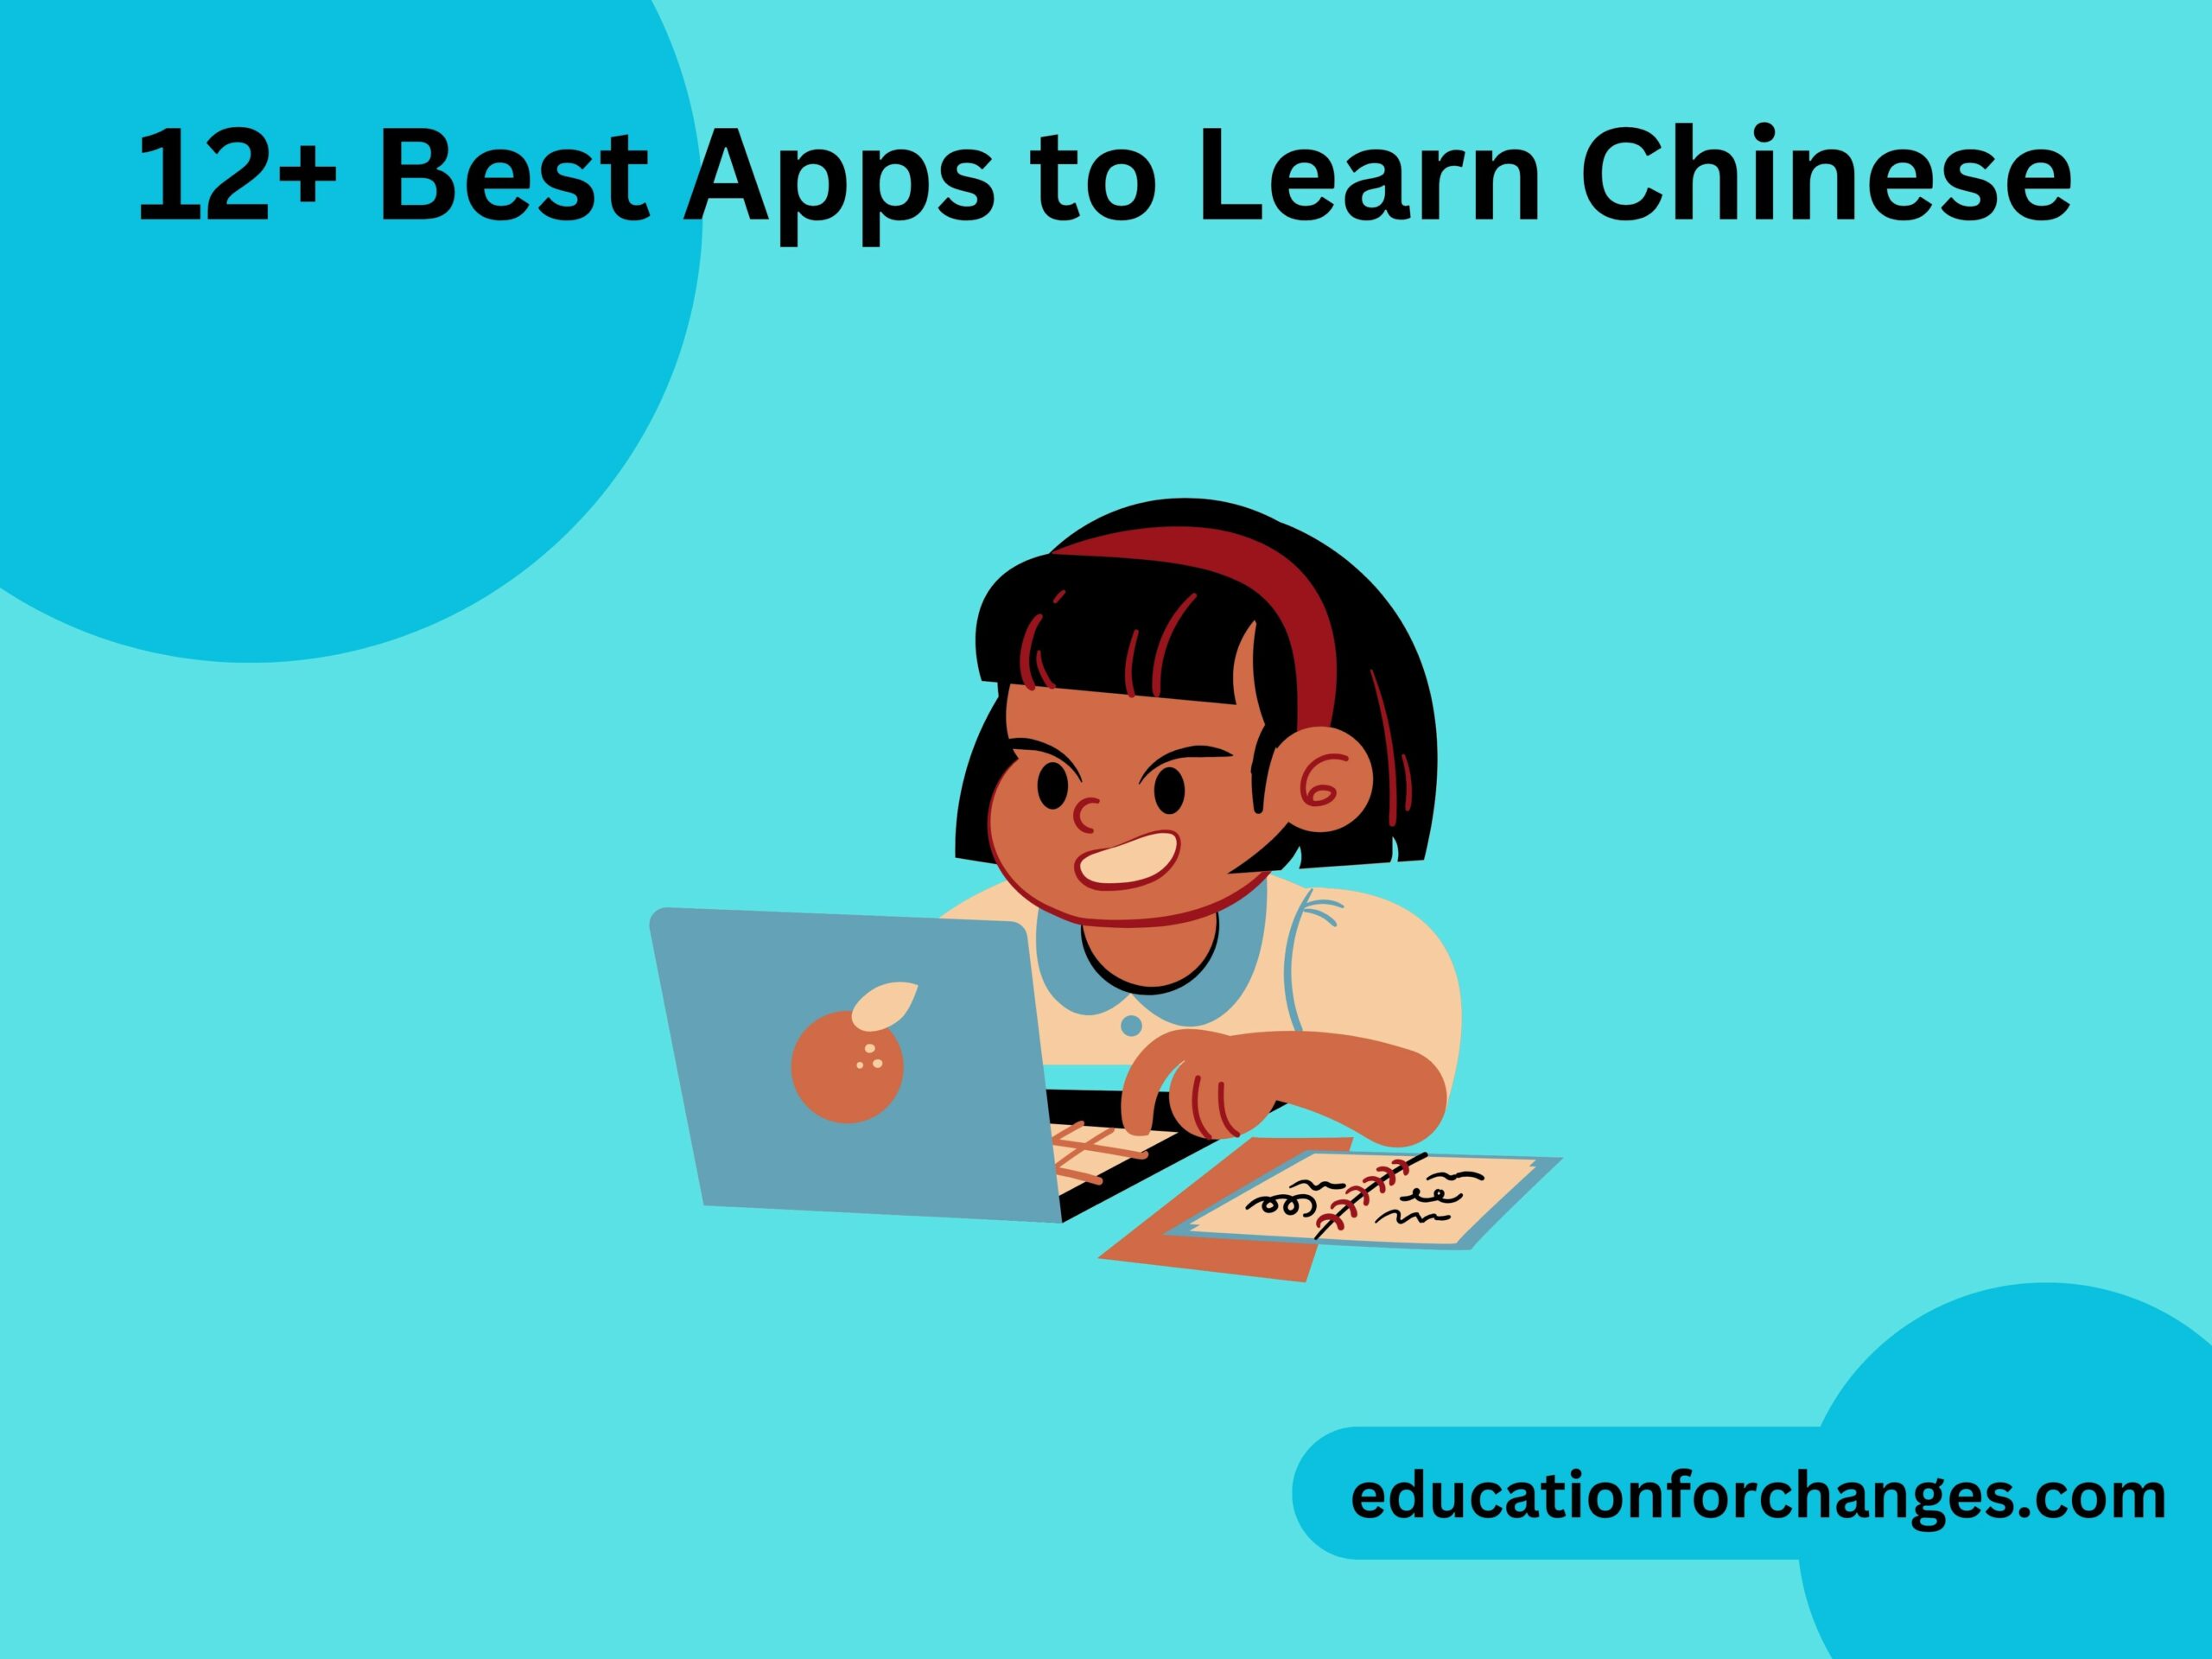 12+ Best Apps to Learn Chinese